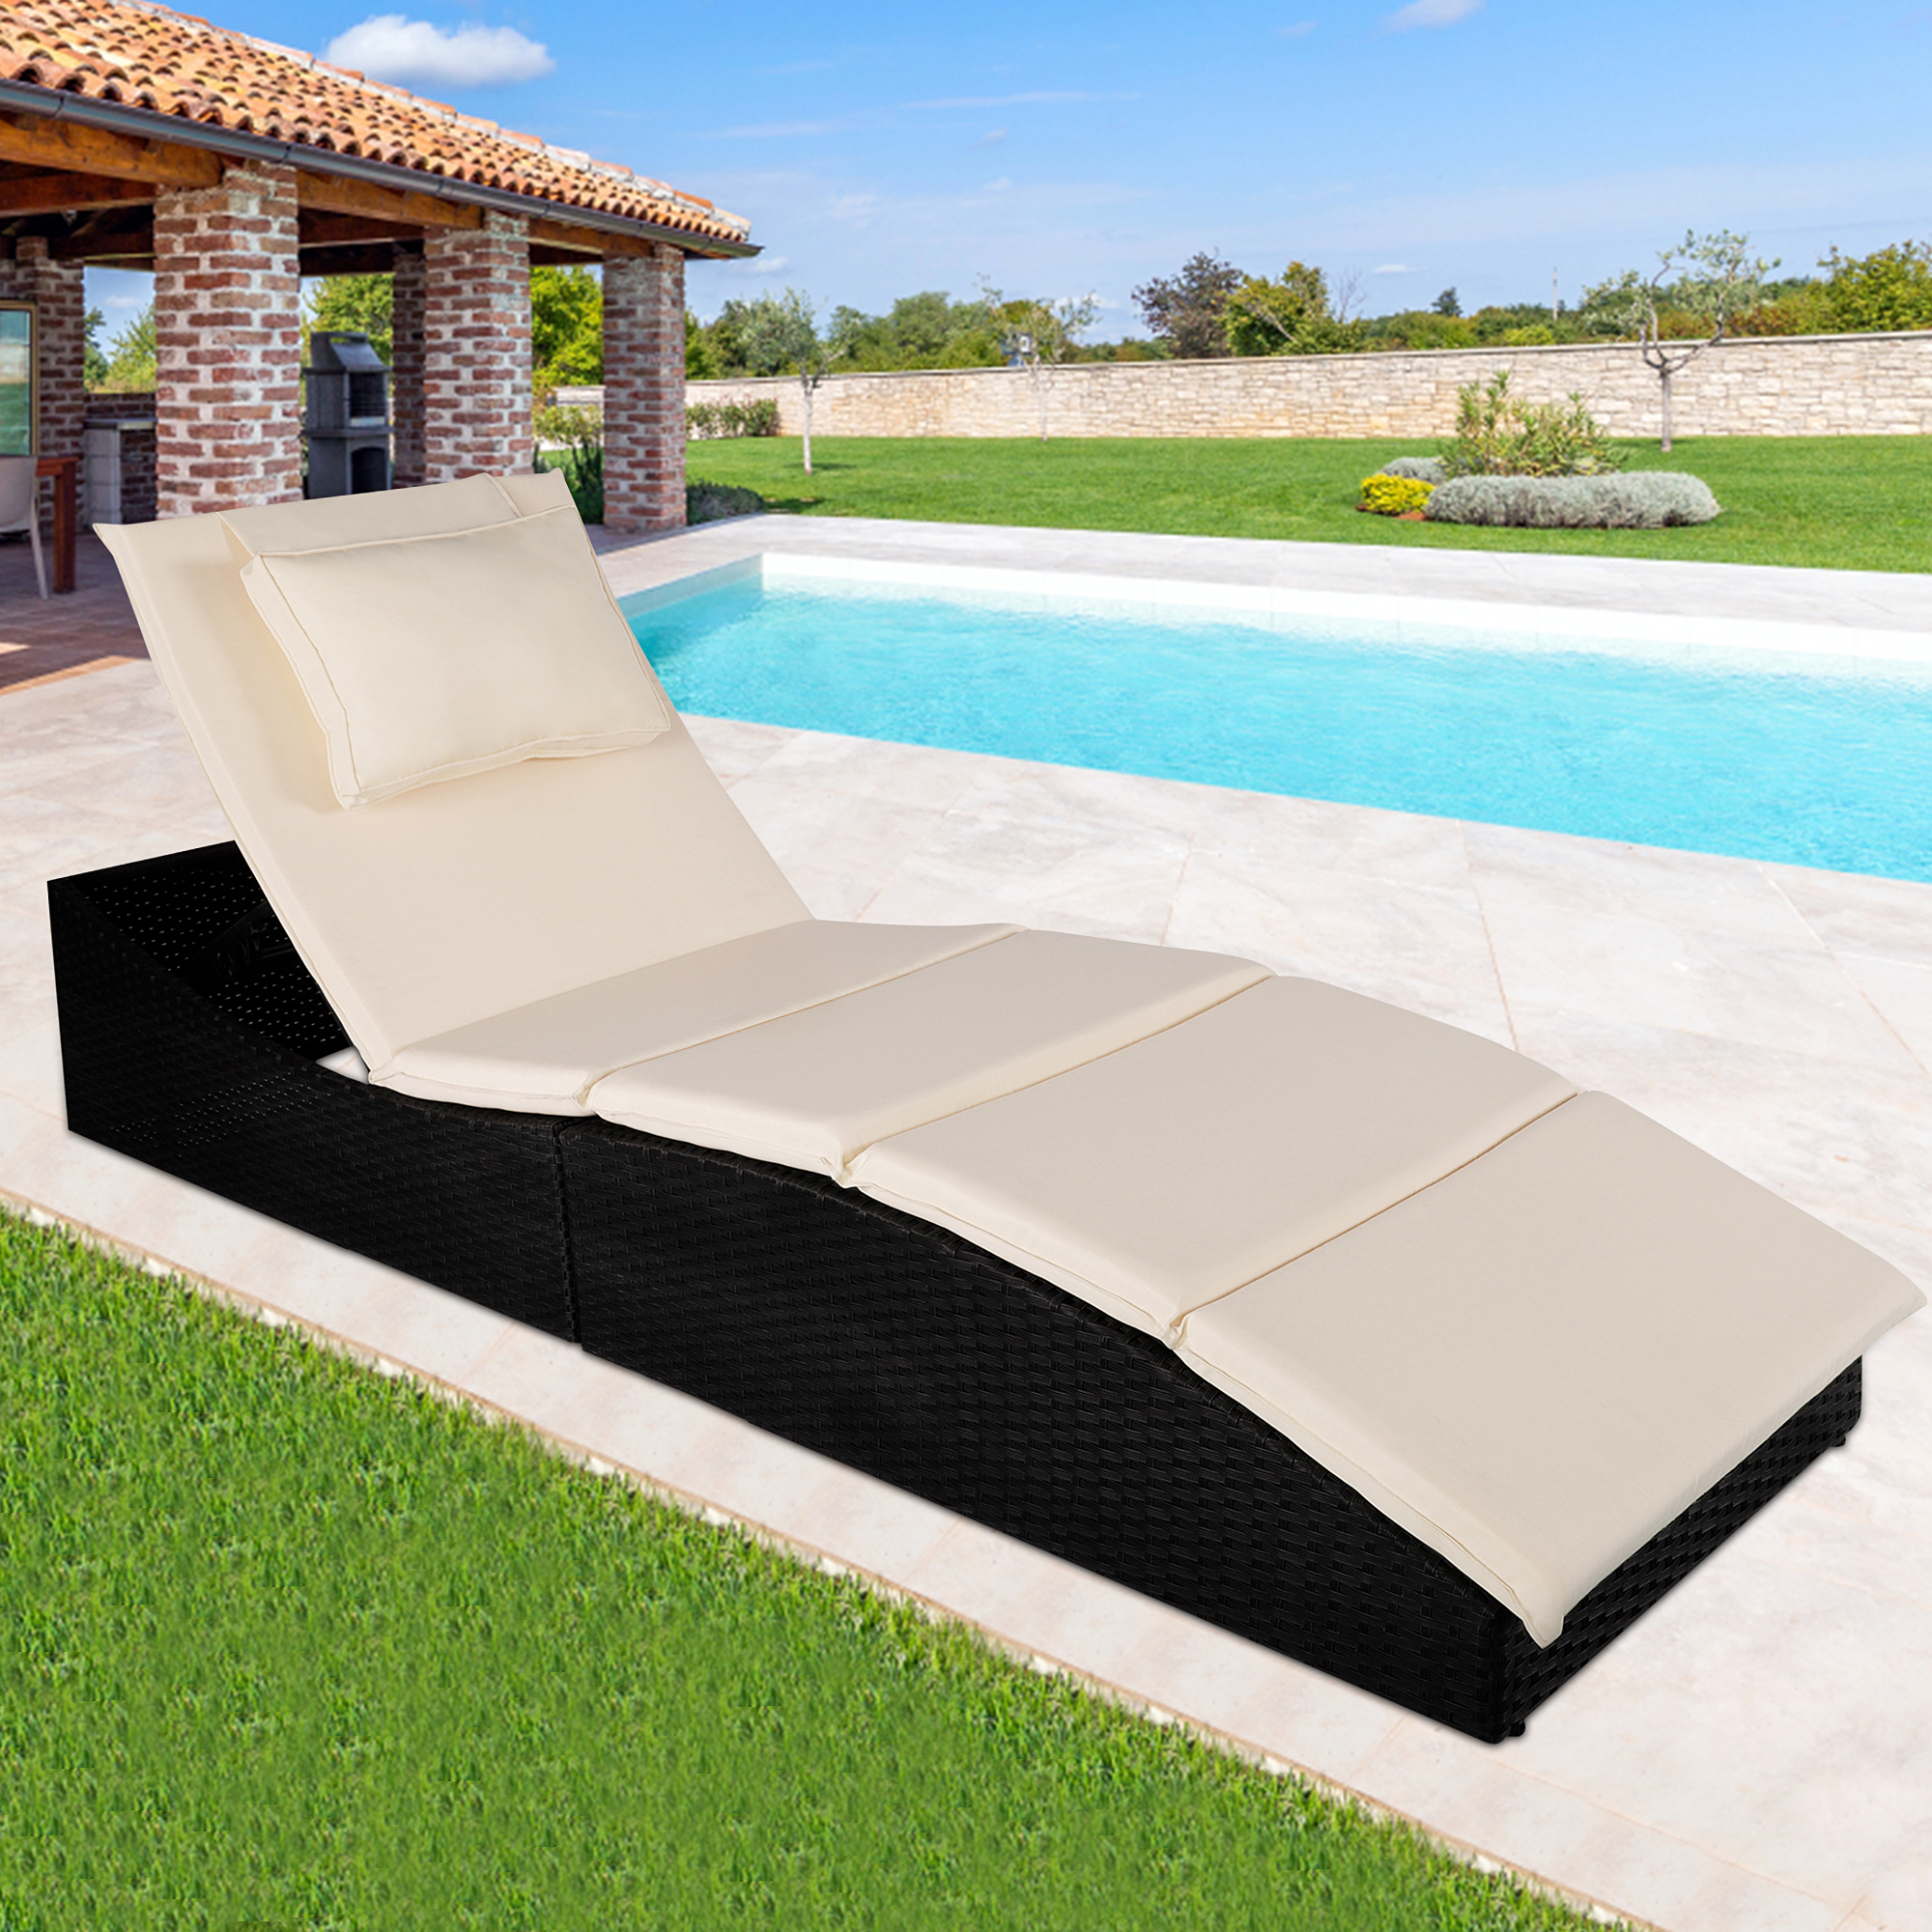 Patio Rattan Pool Lounge Chair with Cushion, 5 Adjustable Positions Folding Patio Chaise Lounge, Outdoor Wicker Beach Reclining Chair, PE Rattan Beach Lounger Chair for Balcony Deck Patio Garden, T245 - image 4 of 9